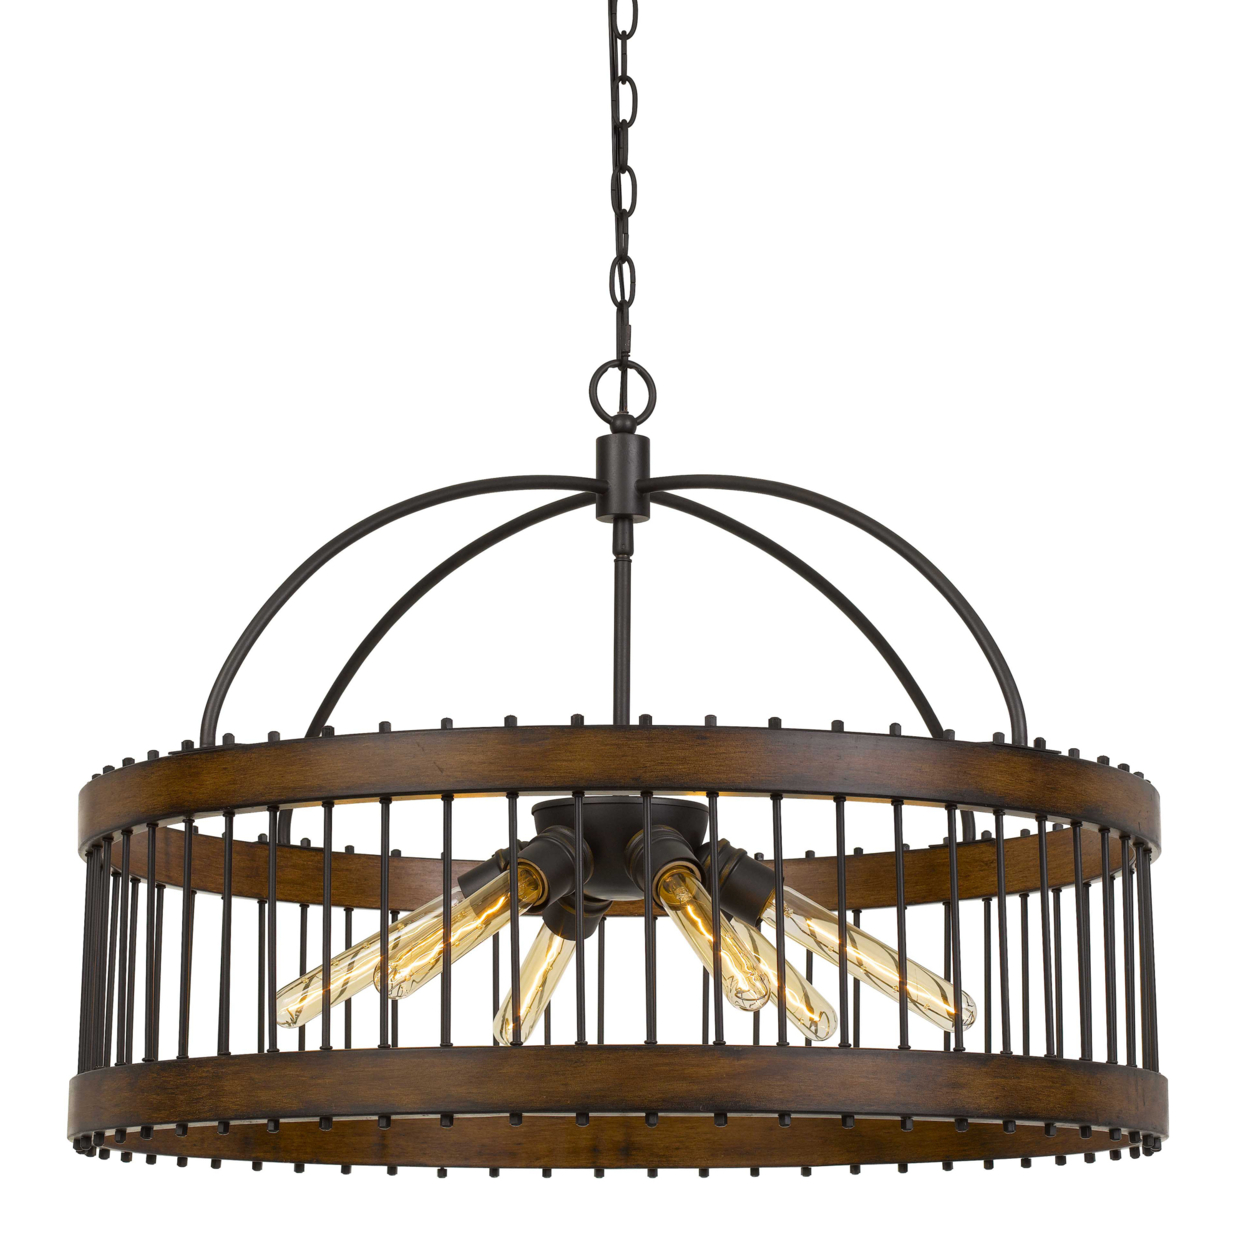 Metal And Wooden Frame Pendant Fixture With Cage Design, Black And Brown- Saltoro Sherpi